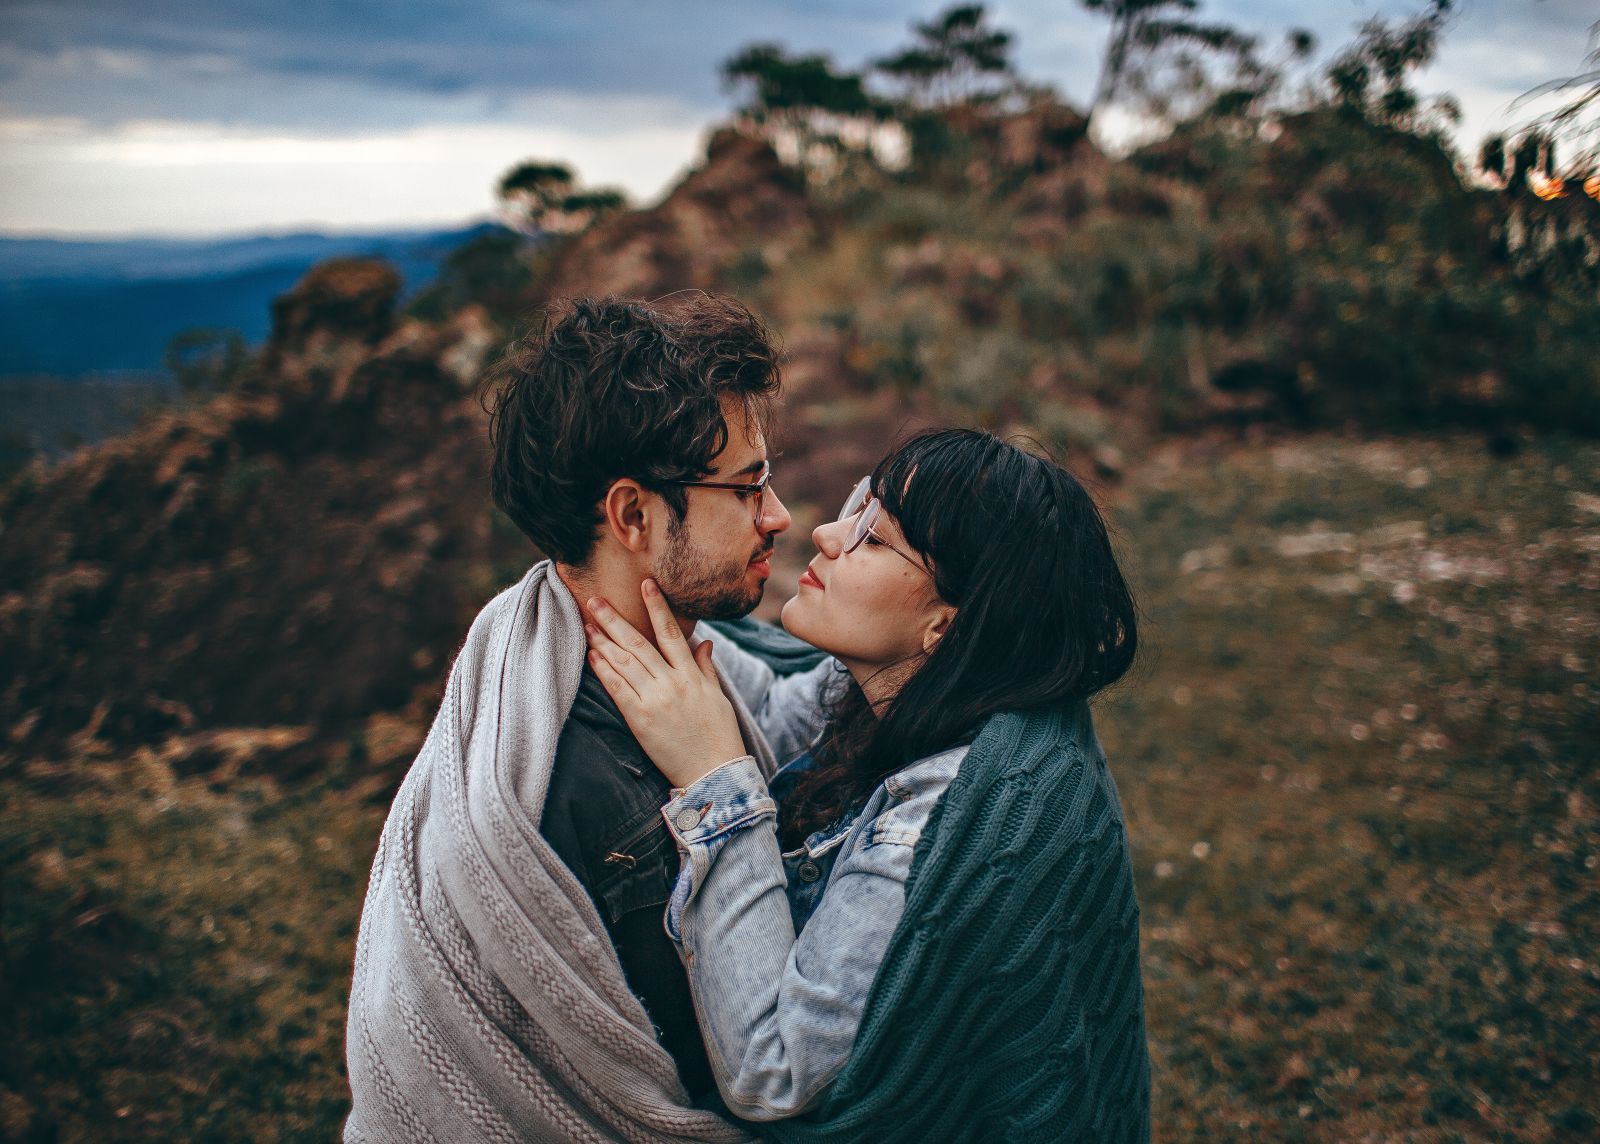 How To Build An Emotional Connection In A Relationship